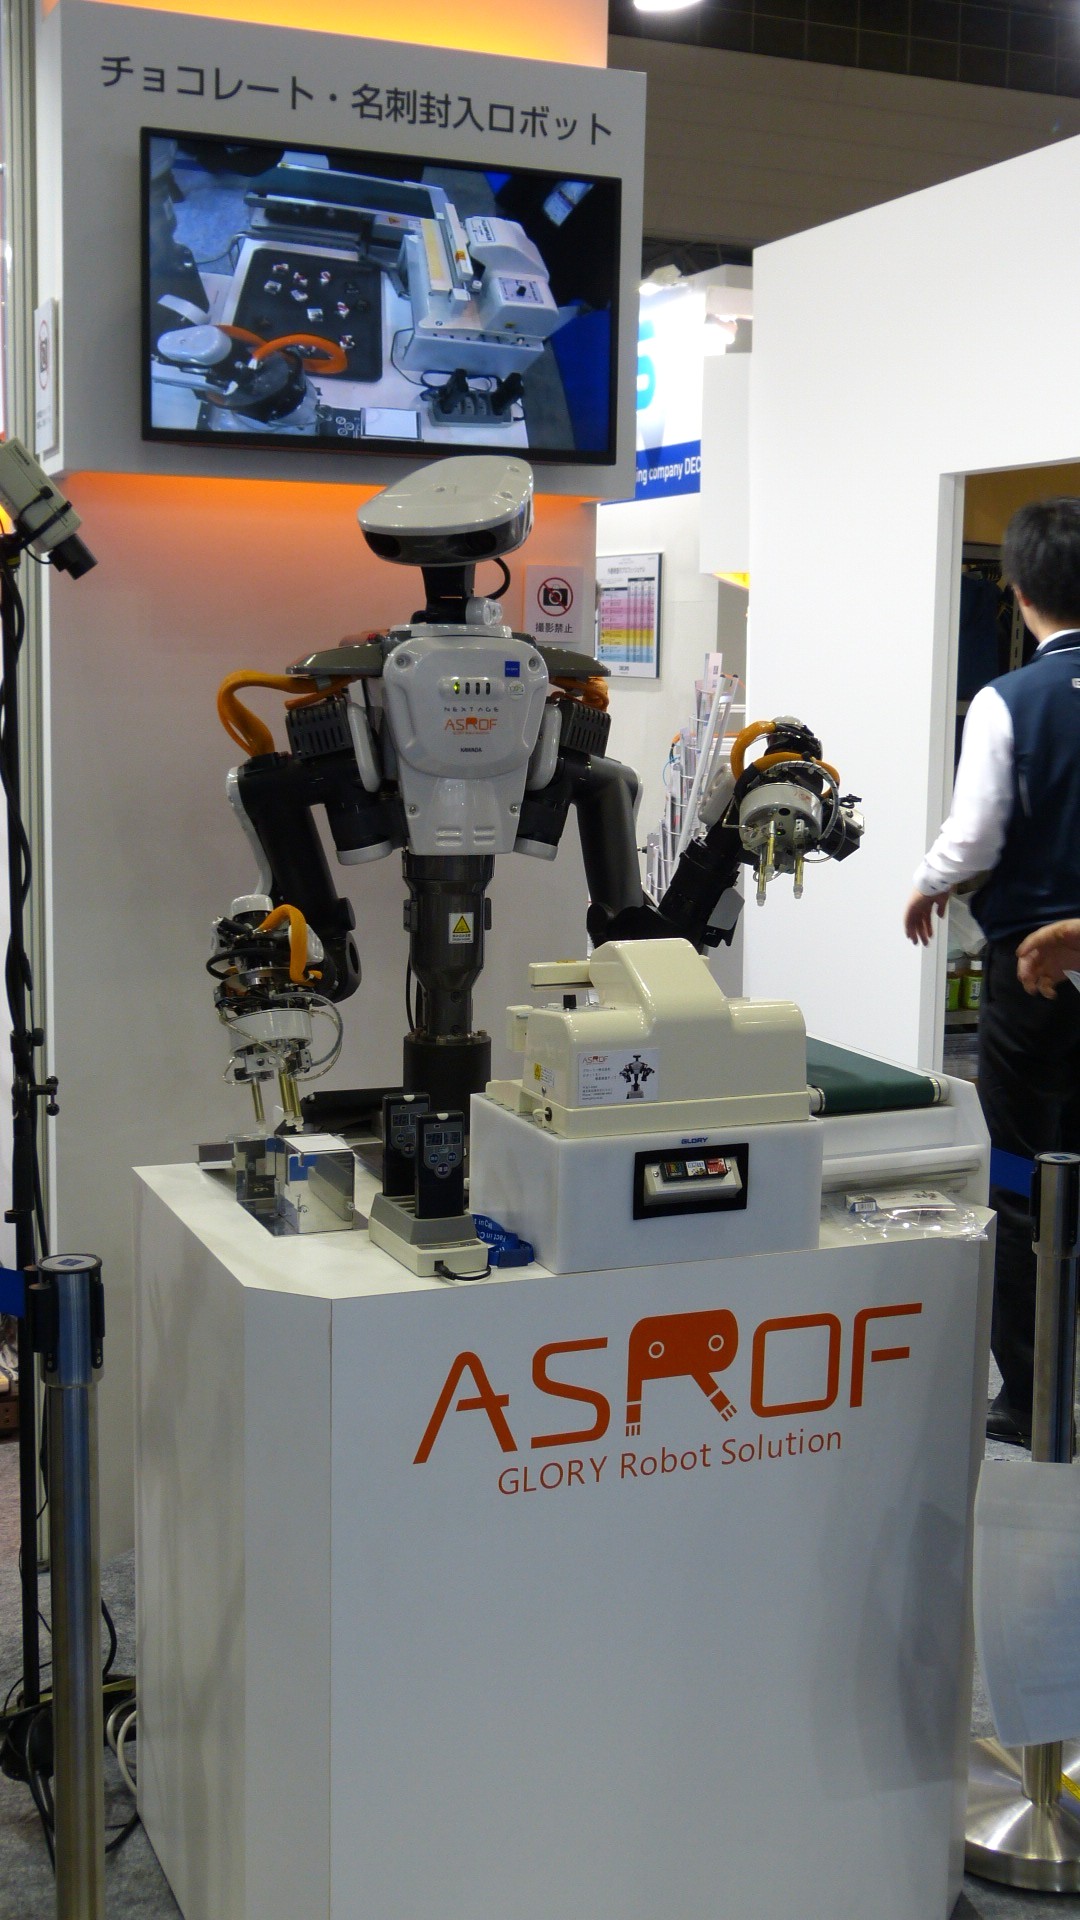 a robot without legs is mounted on a counter with the logo for Asrof glory robot solution.  A screen behind it shows its camera view of small objects.